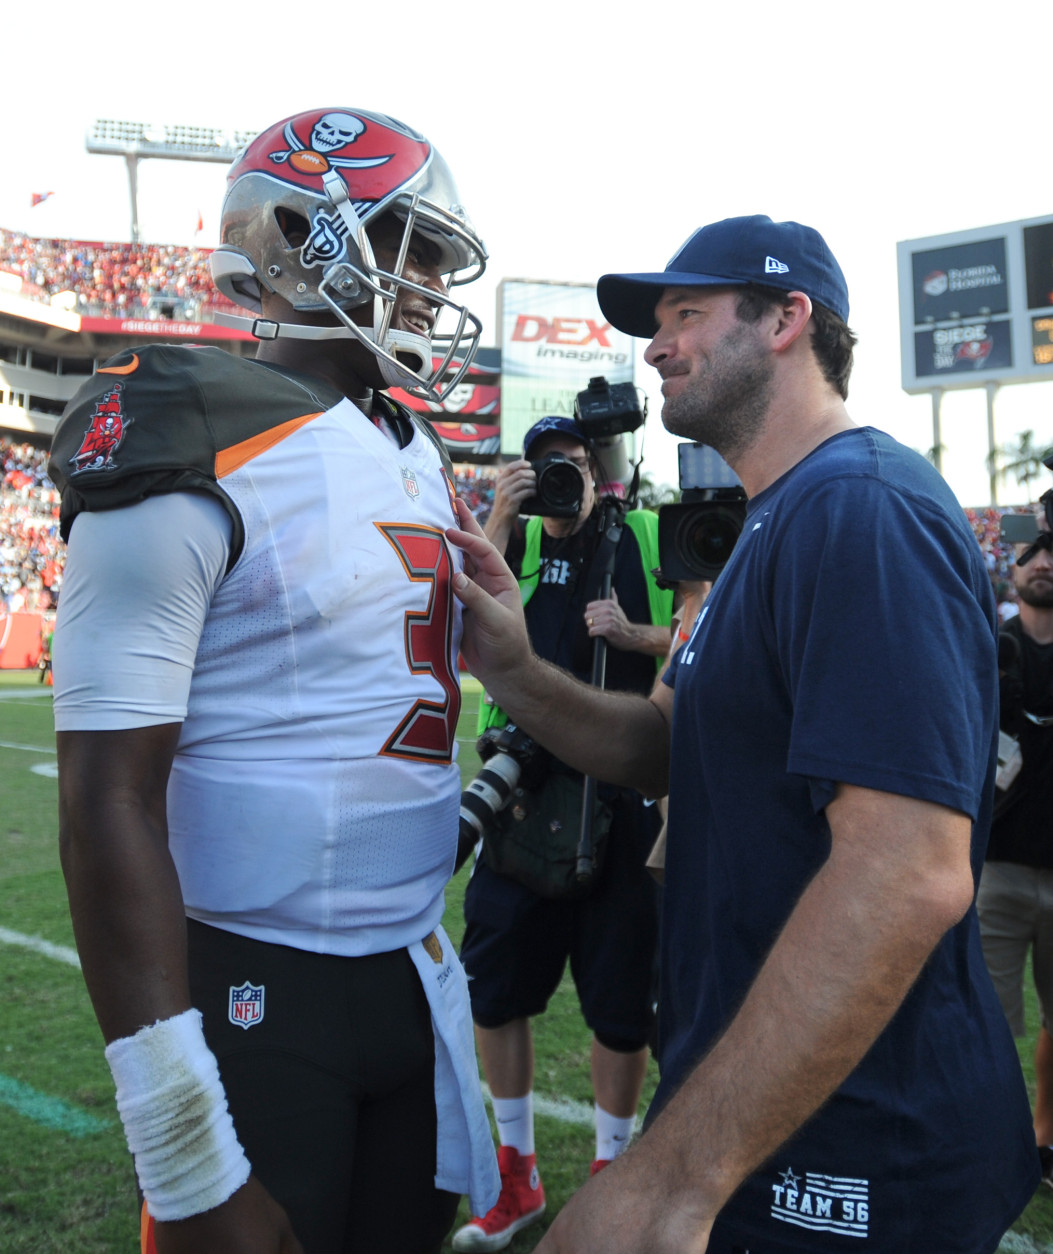 TAMPA, FL - NOVEMBER 15: Quarterback Jameis Winston #3 of the Tampa Bay Buccaneers talks with quarterback Tony Romo #9 of the Dallas Cowboys at the end of the game at Raymond James Stadium on November 15, 2015 in Tampa, Florida. The Buccaneers beat the Cowboys 10-6. (Photo by Cliff McBride/Getty Images) *** Local Caption *** Jameis Winston;Tony Romo